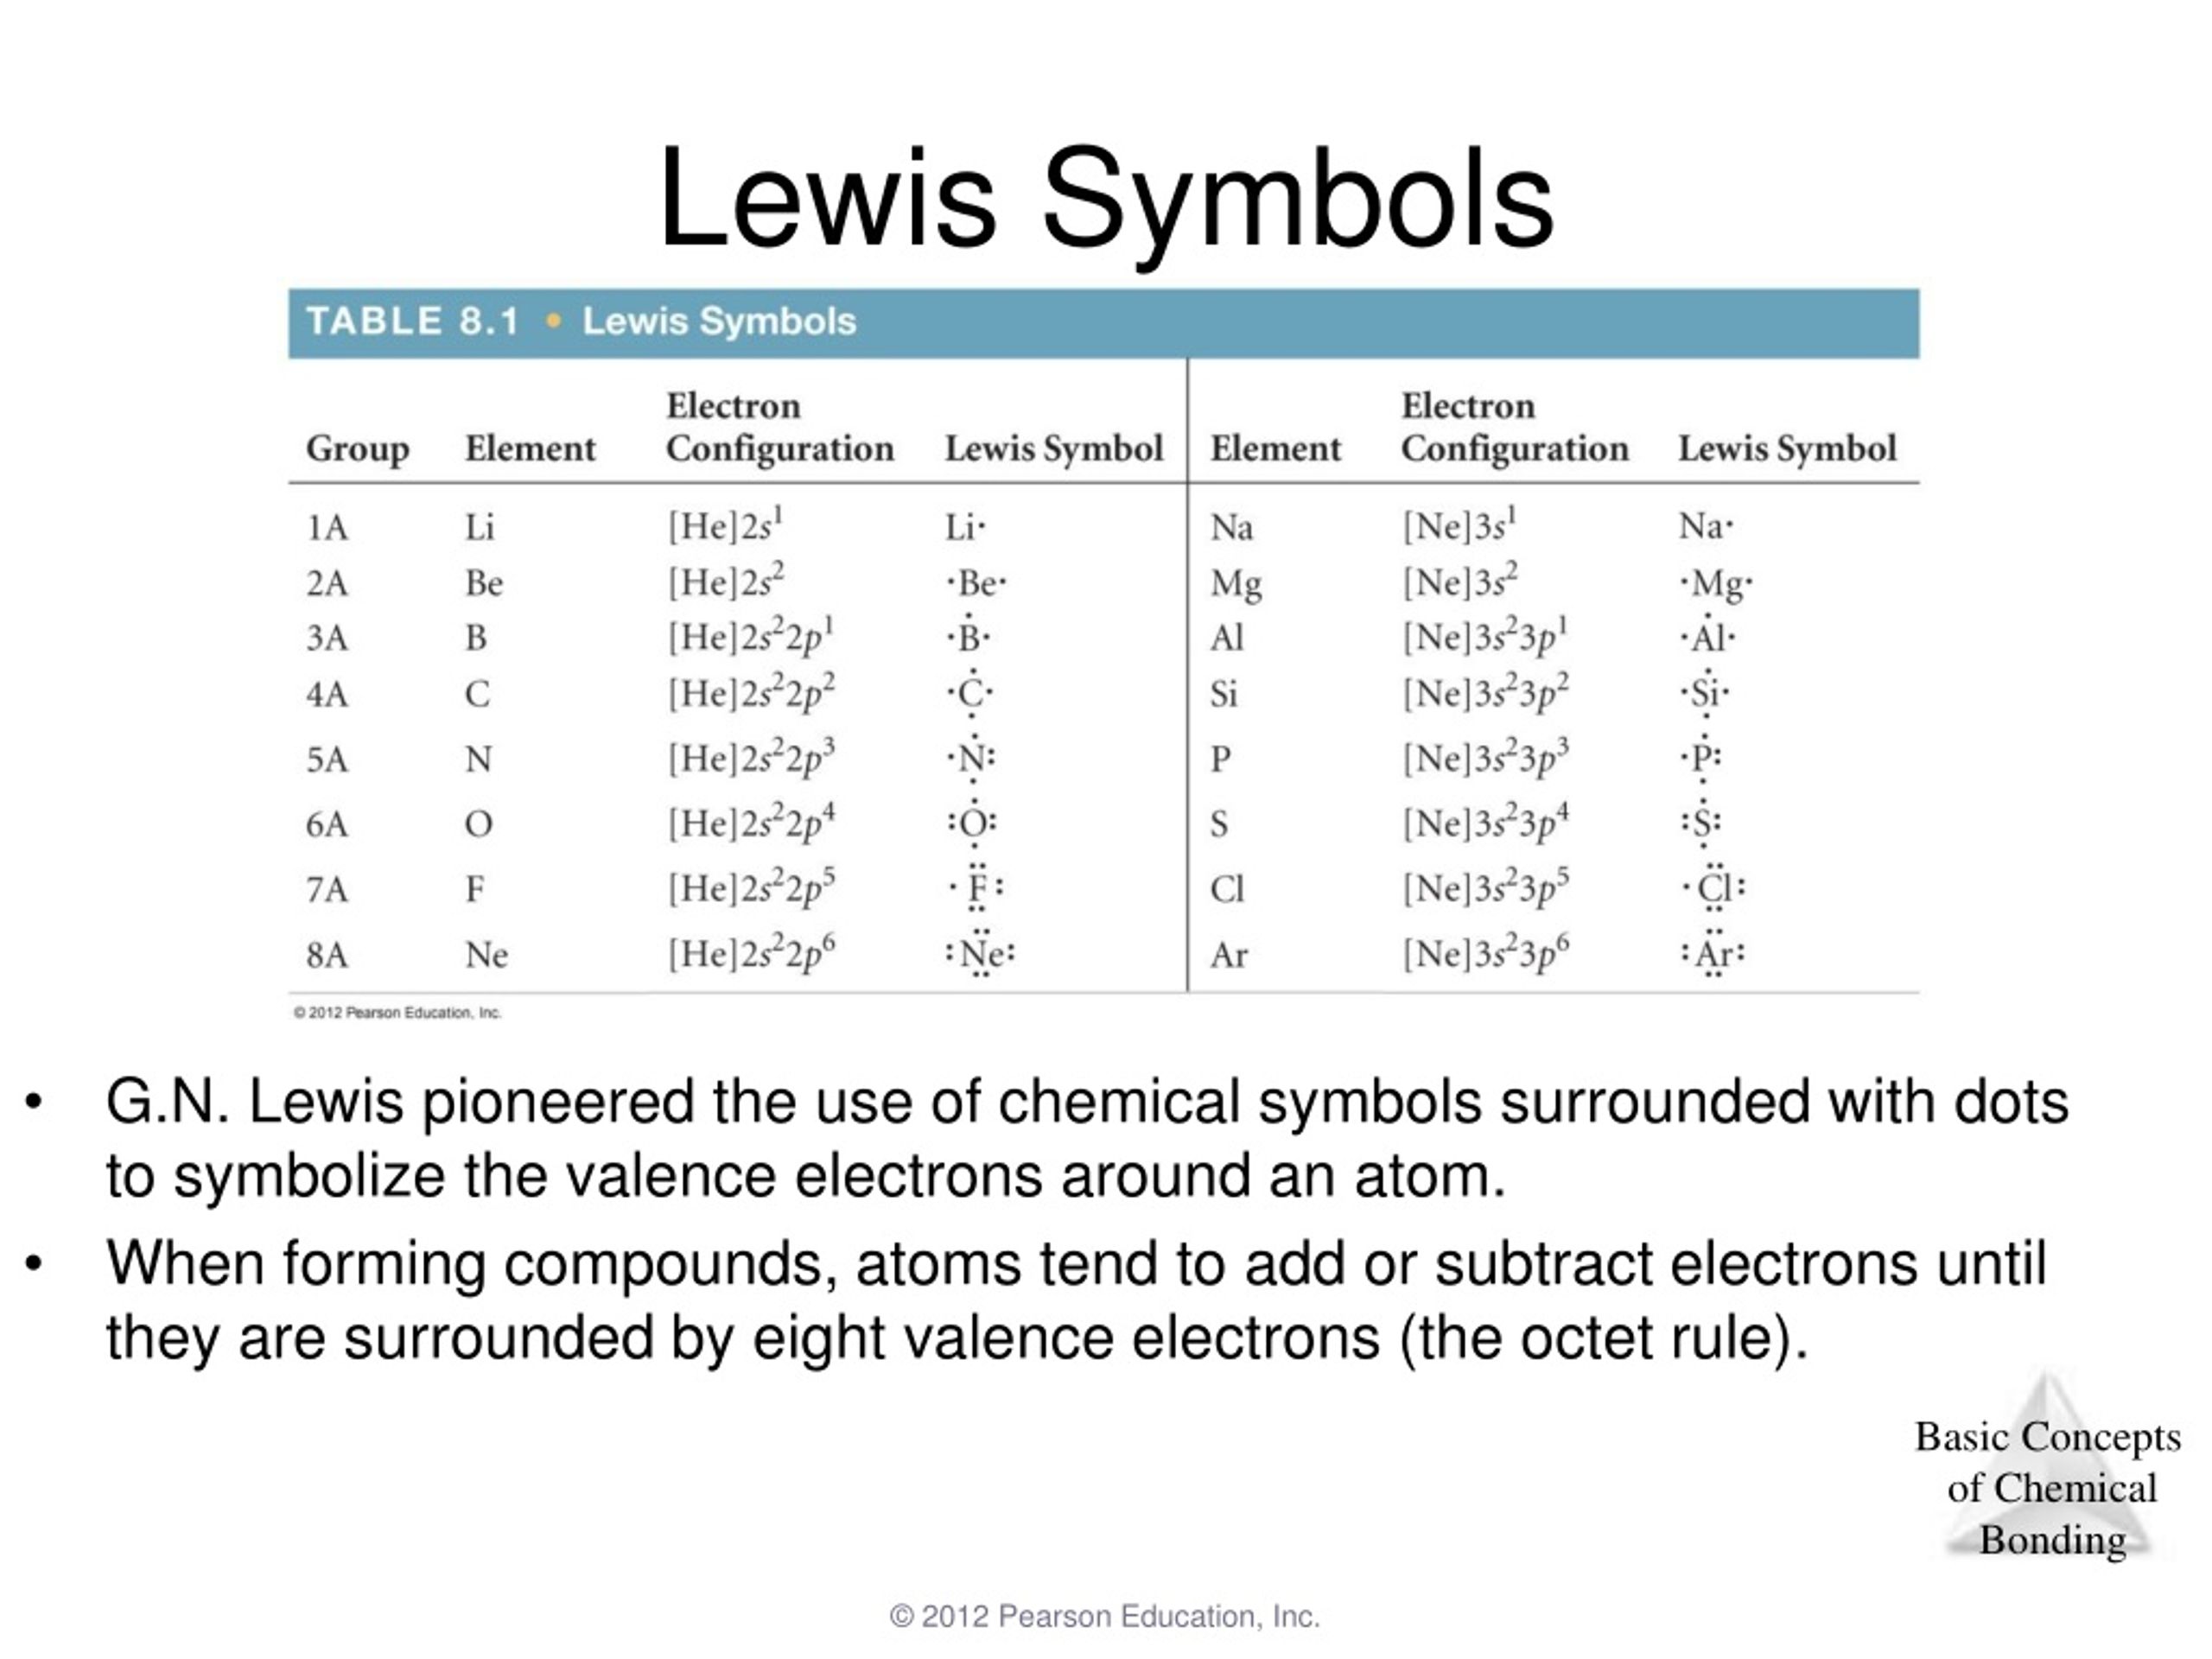 PPT - Chapter 8 Basic Concepts of Chemical Bonding PowerPoint ...